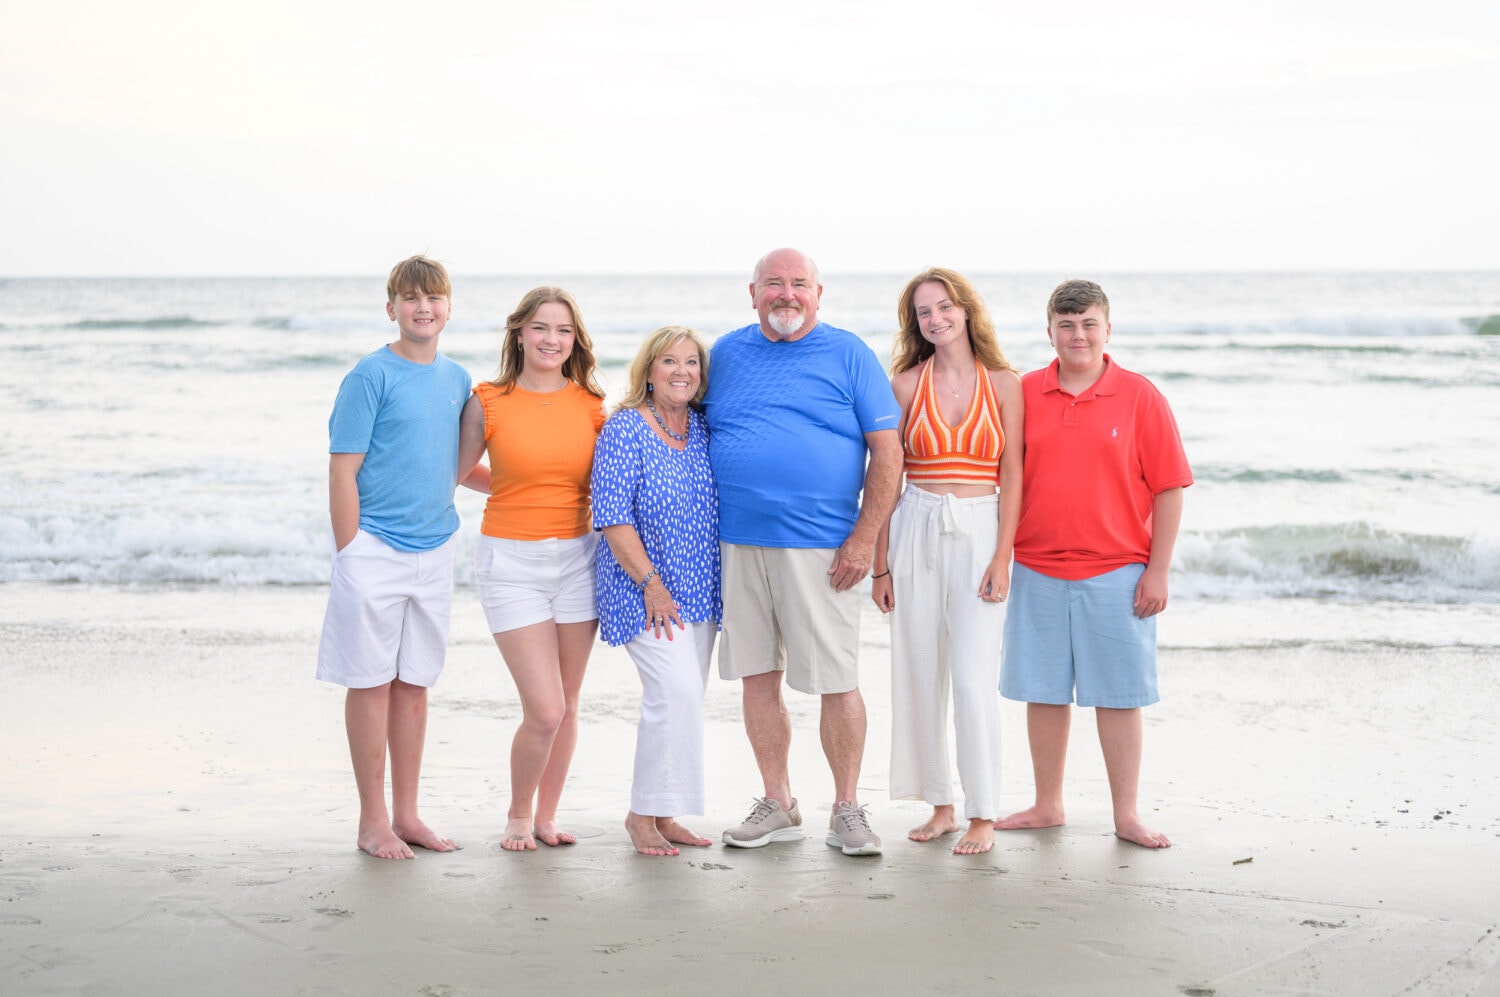 Family with colorful outfits having fun on the beach - Huntington Beach State Park